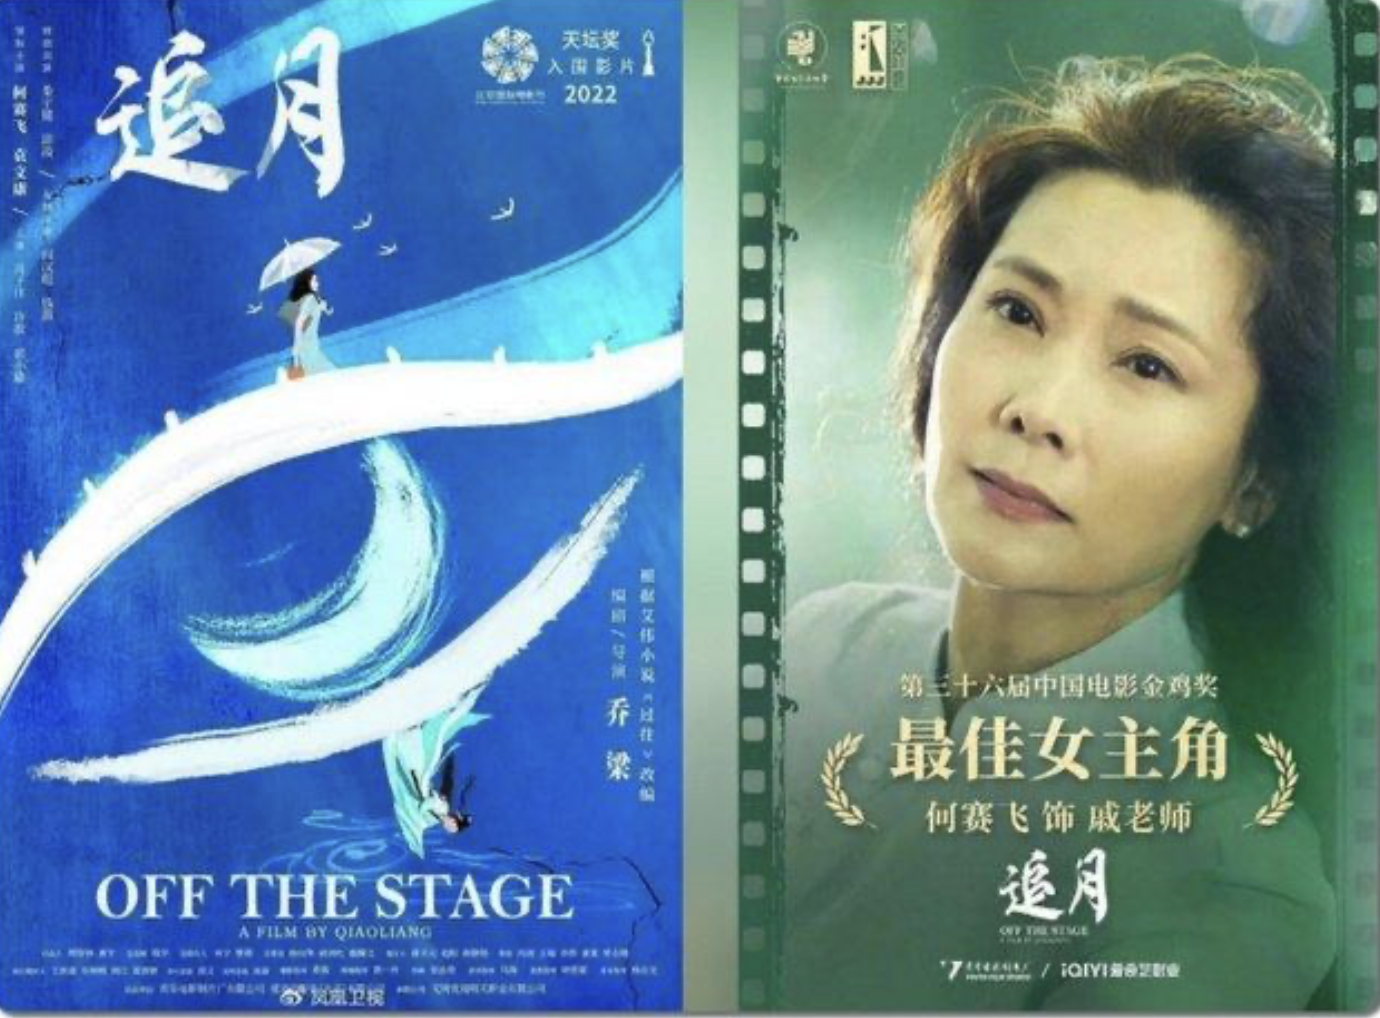 Acclaimed Chinese film ‘Off the Stage’ garners praise at South Korean premiere